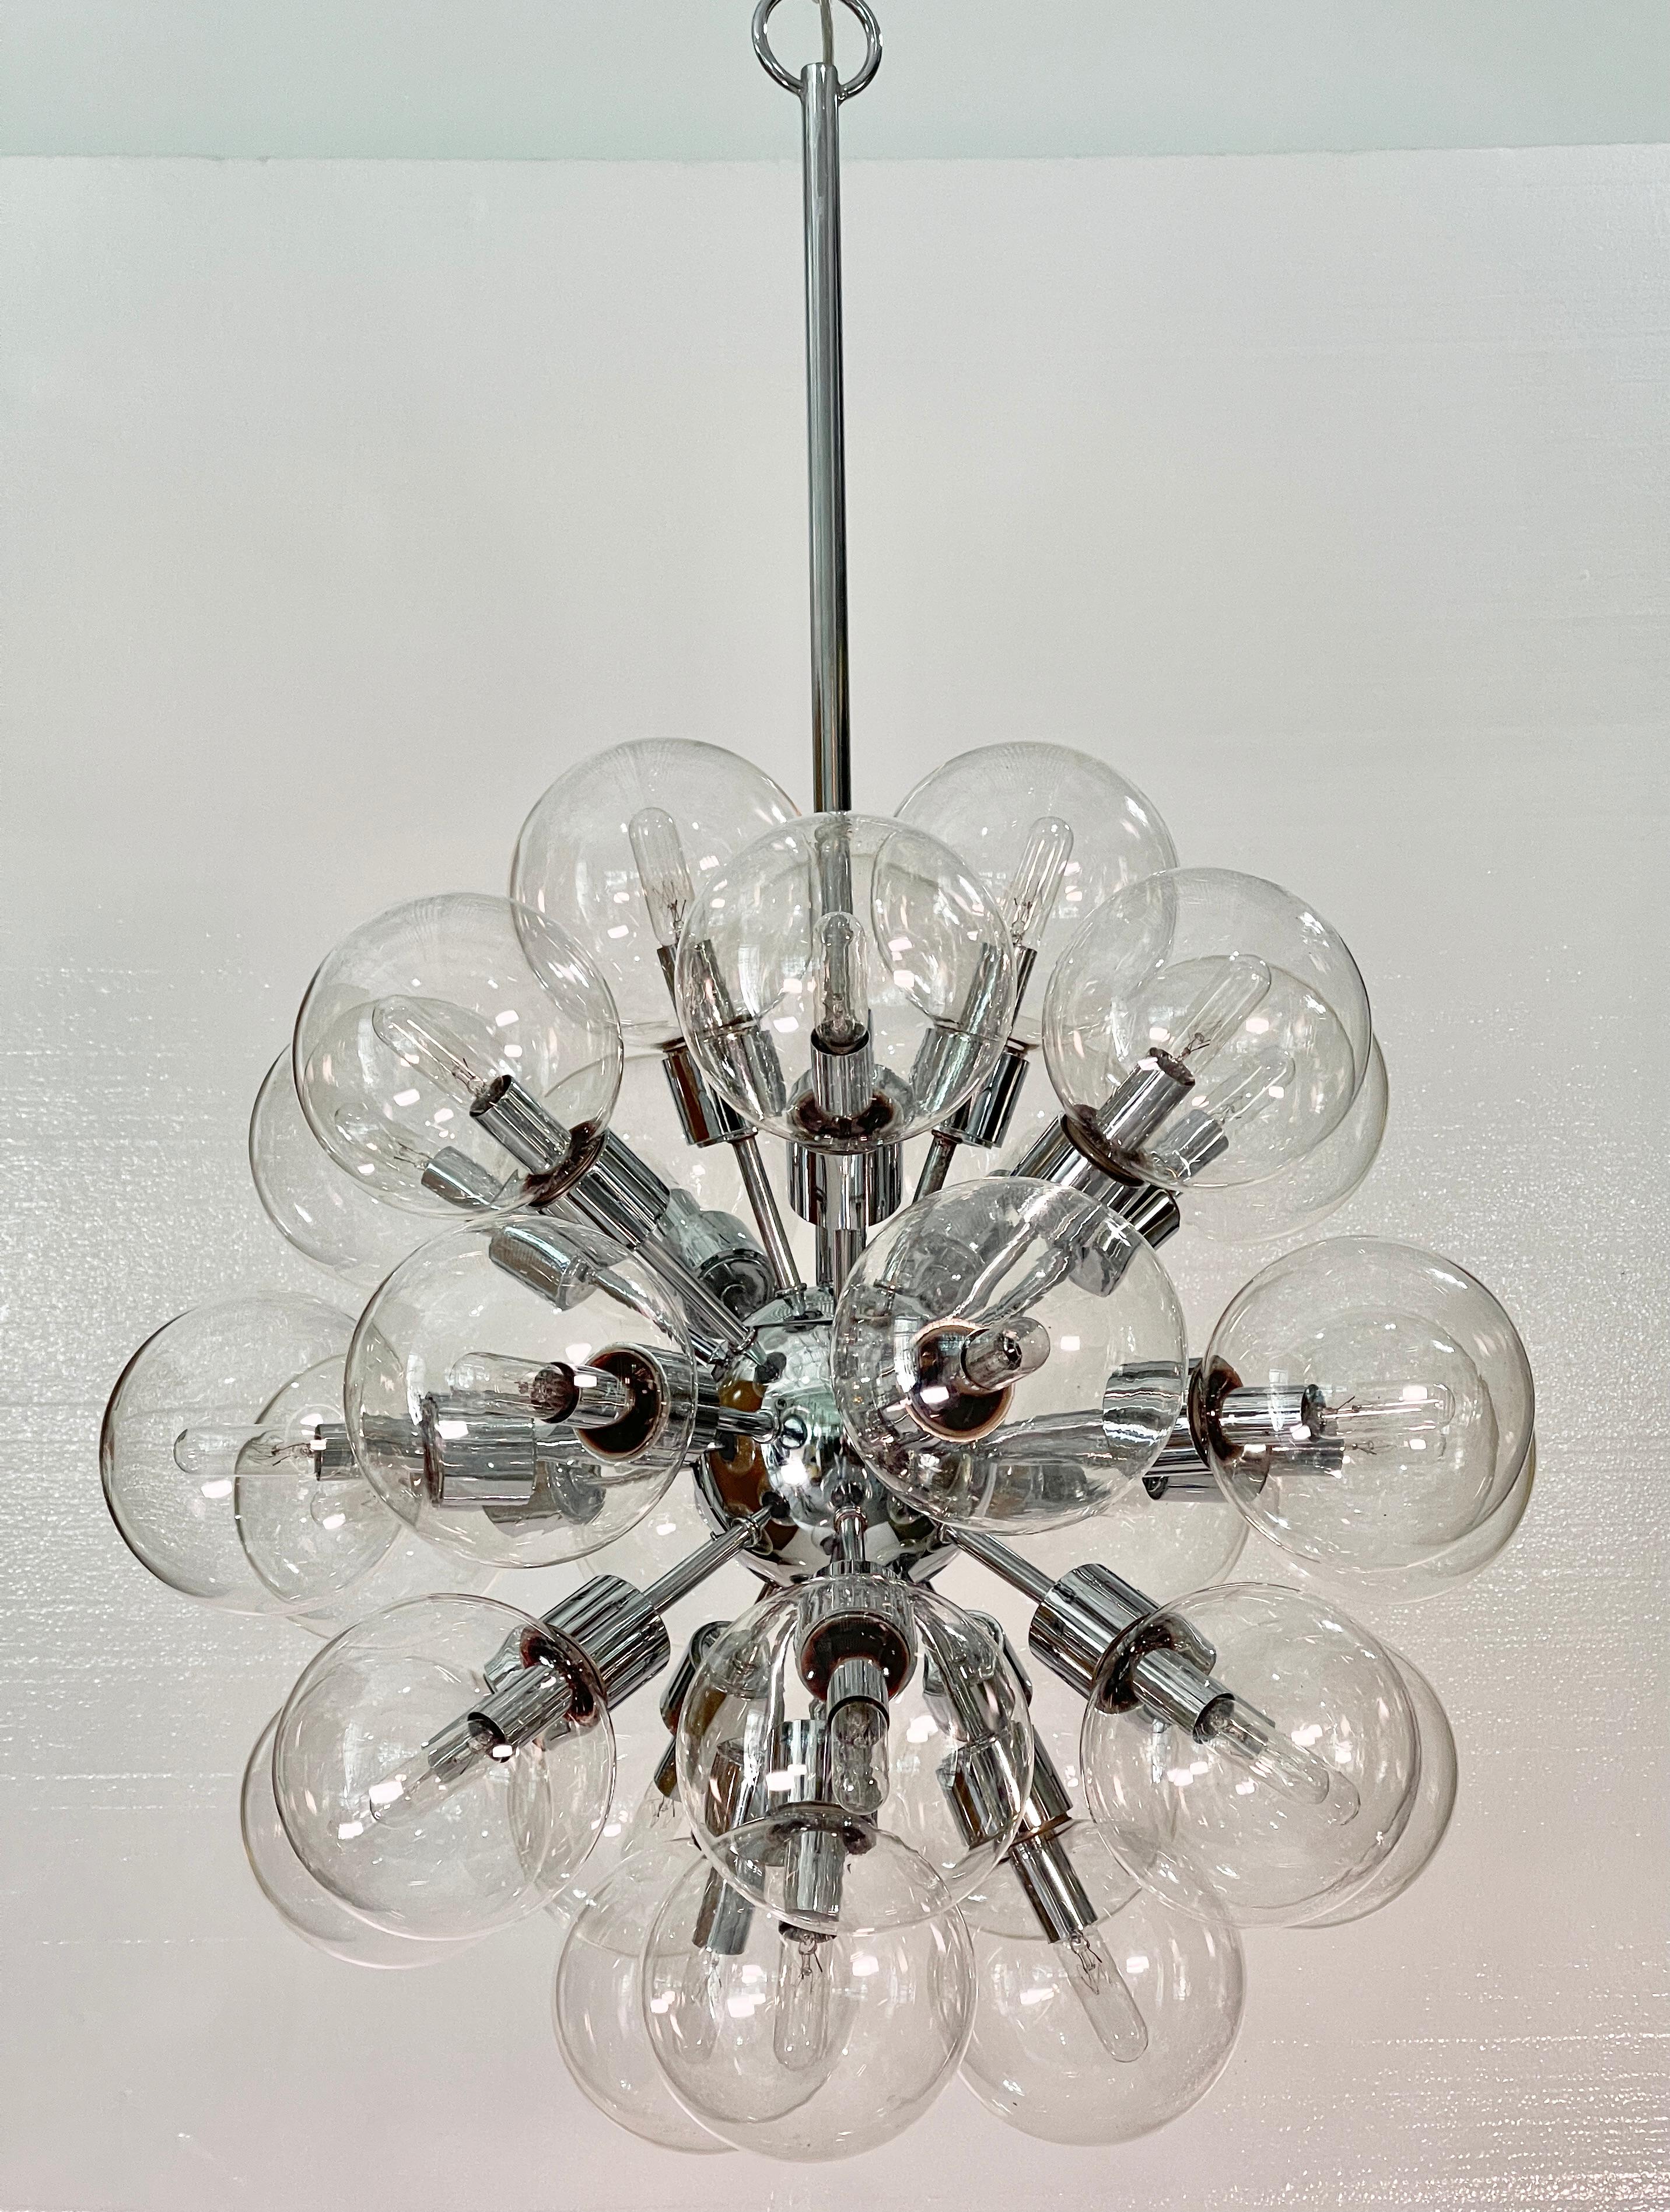 From the Space Crystal collection designed by Motoko Ishii, the multi-award winning savant of architectural lighting, created in 1972 for West German firm Staff Leuchten.. 
This UL certified hefty chrome plated sputnik chandelier was produced circa